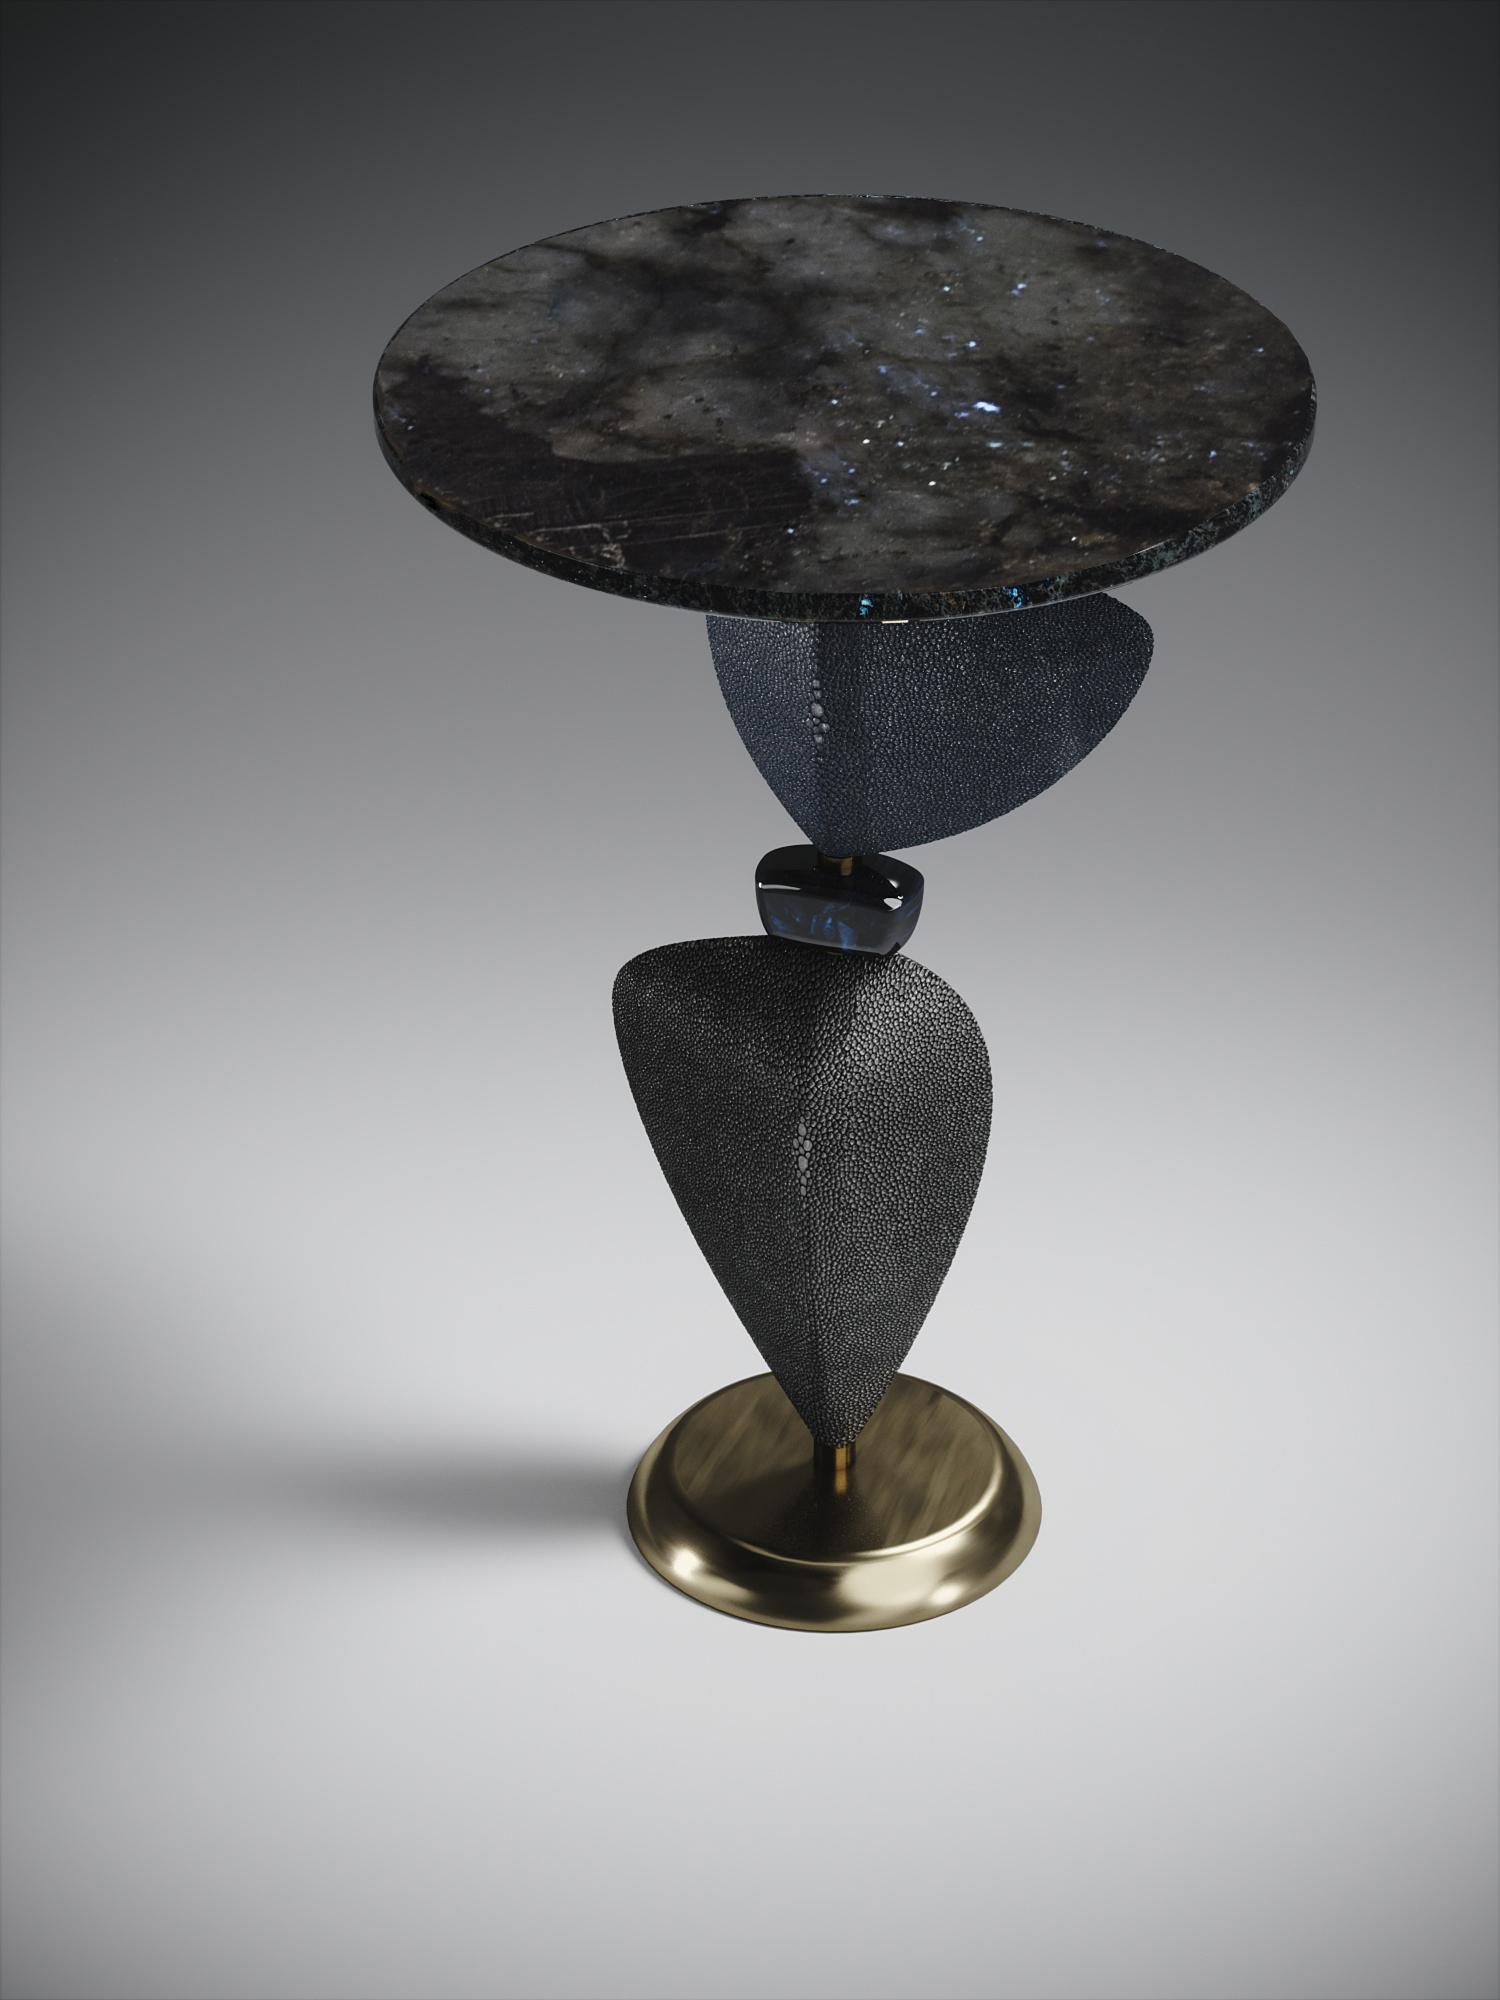 The Cosmo sky side table by Kifu Paris is a whimsical and sculptural piece, inlaid in Lemurian, dark denim blue shagreen, blue pen shell, coal black shagreen and bronze-patina brass. This piece is a sister to the original Cosmo Side Table by Kifu